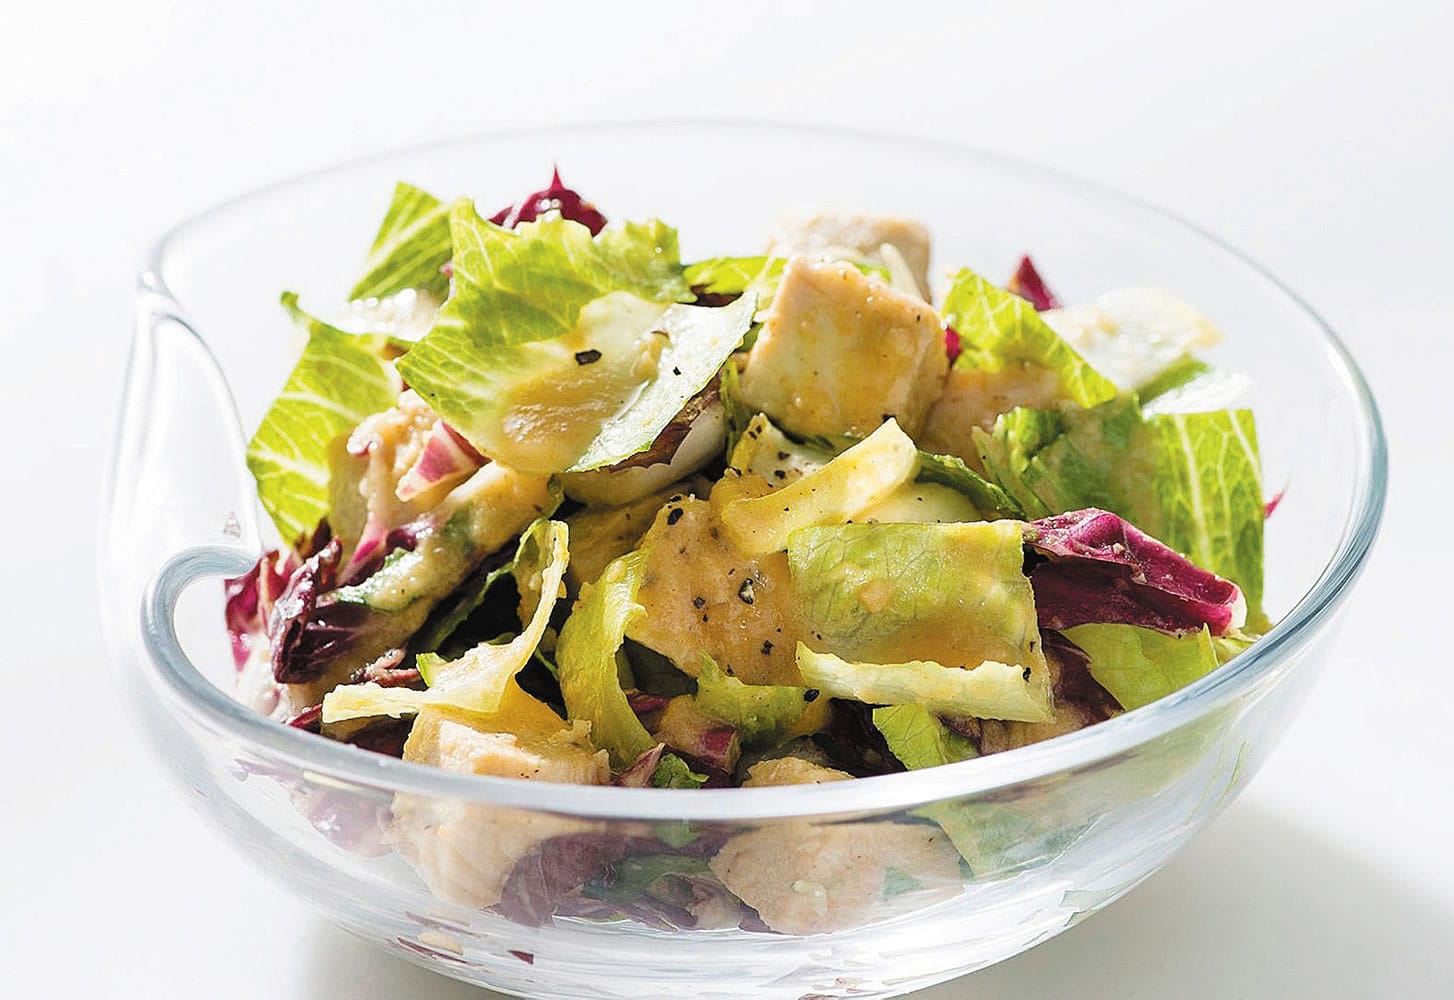 Chicken salad with roasted root vegetables from Giada de Laurentis' &quot;Feel Good Food.&quot;